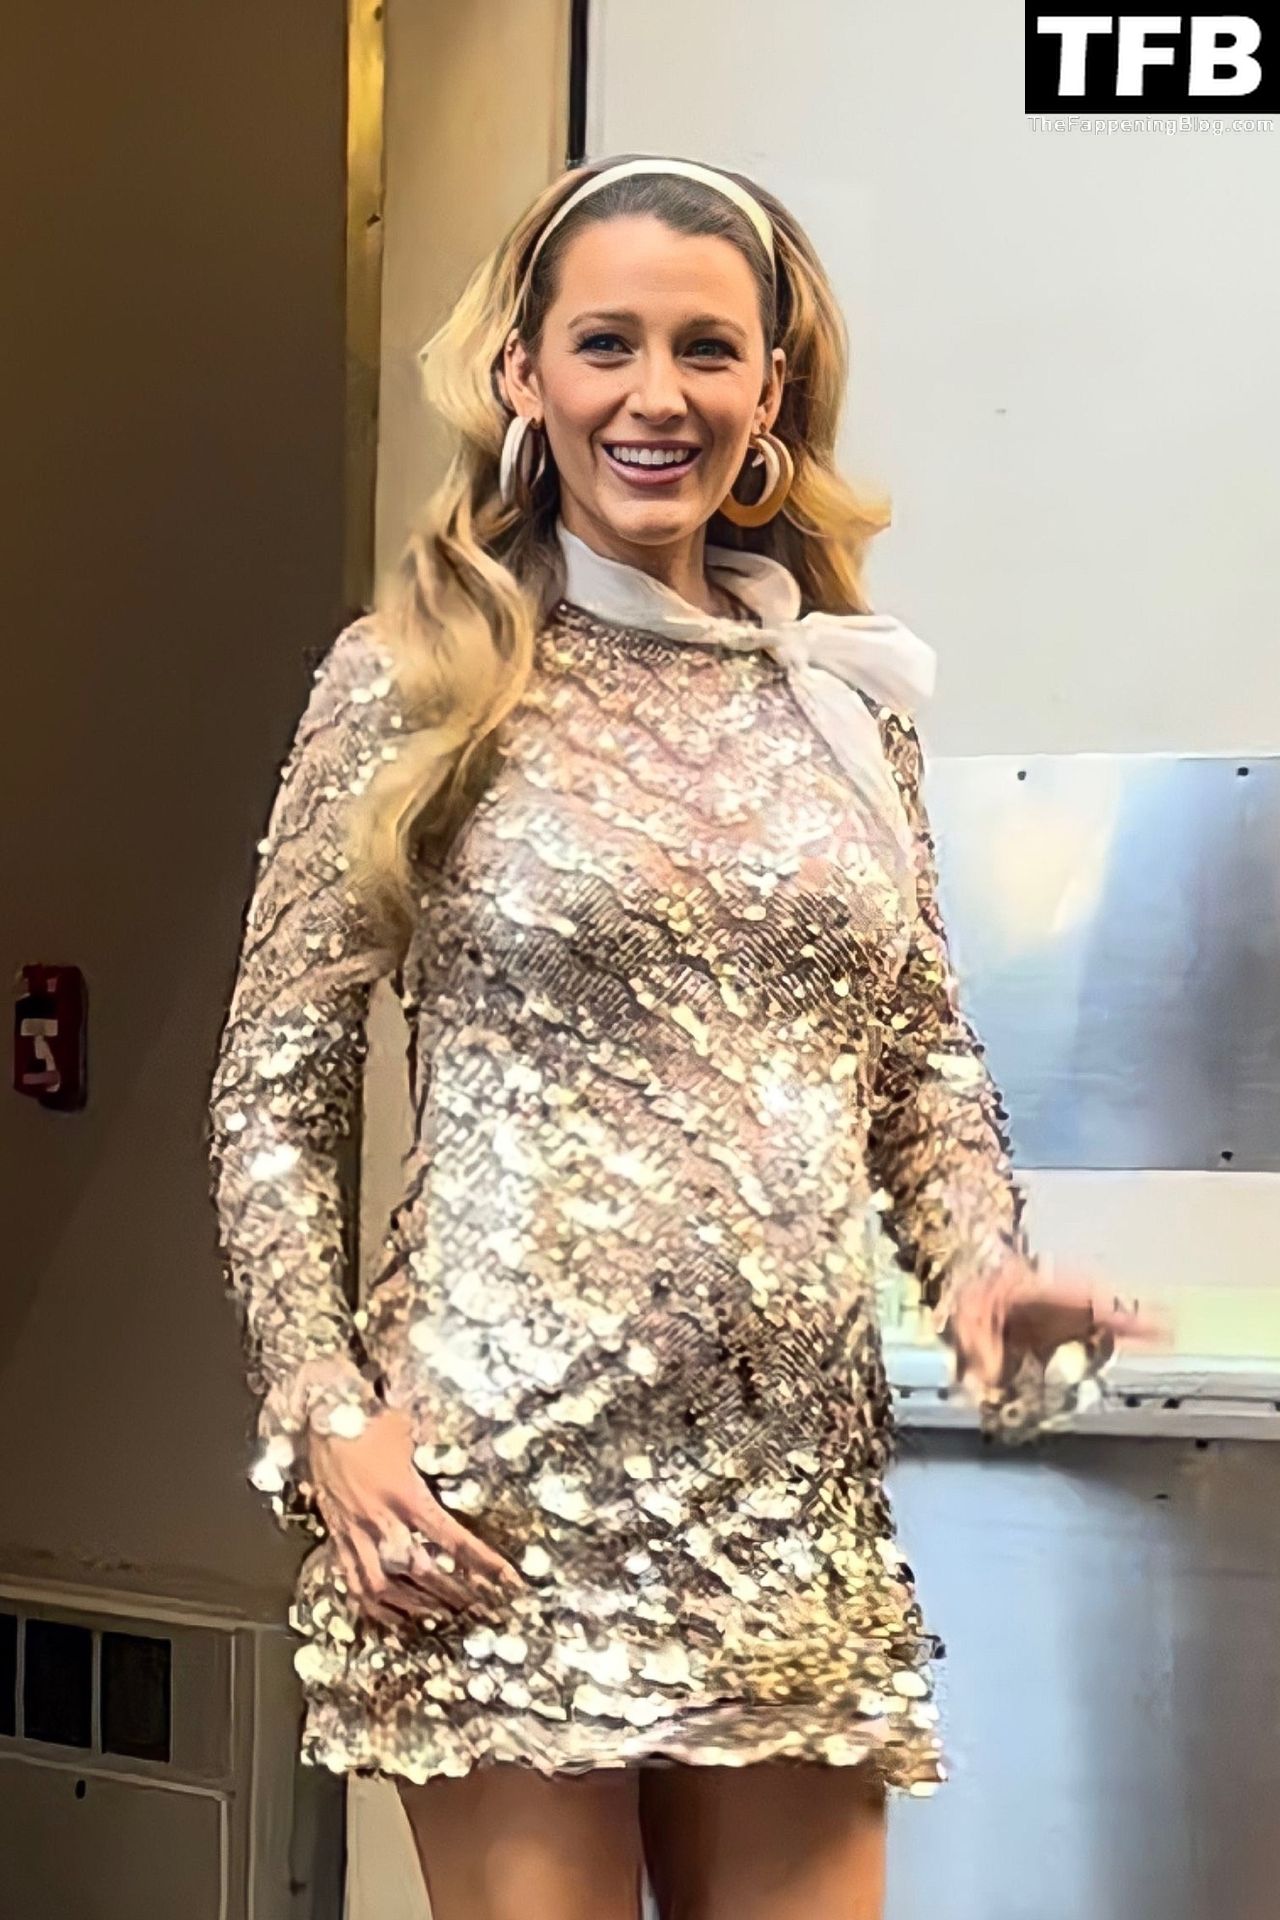 Leggy Blake Lively Exits Forbes Summit After Announcing Fourth Pregnancy (68 Photos)